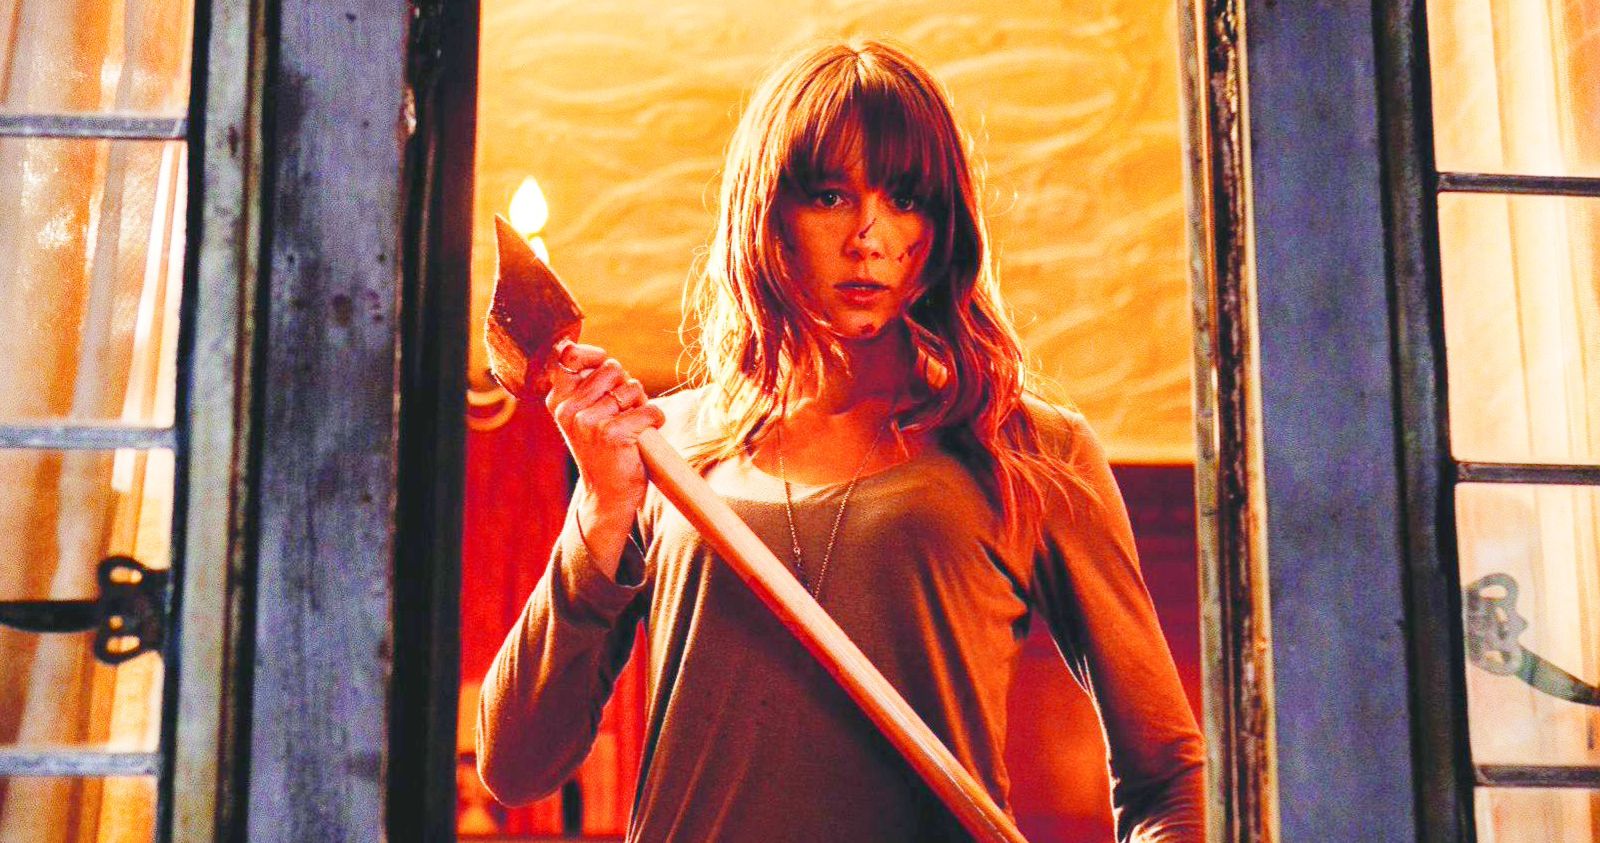 Why You're Next 2 Never Happened According to Seance Director Simon Barrett